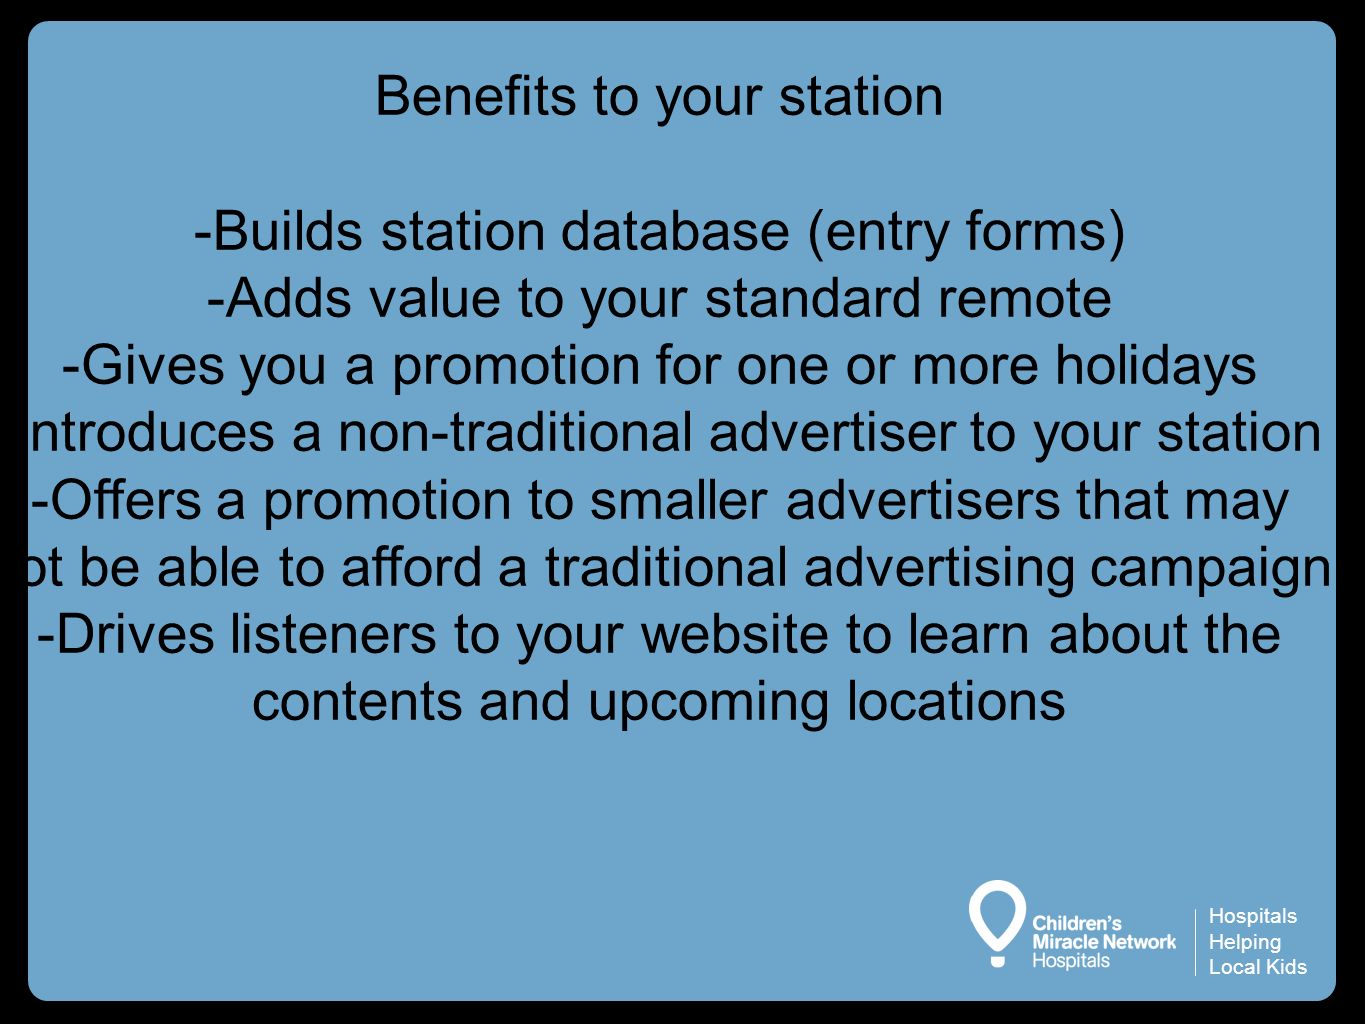 Hospitals Helping Local Kids Benefits to your station -Builds station database (entry forms) -Adds value to your standard remote -Gives you a promotion for one or more holidays -Introduces a non-traditional advertiser to your station -Offers a promotion to smaller advertisers that may not be able to afford a traditional advertising campaign -Drives listeners to your website to learn about the contents and upcoming locations